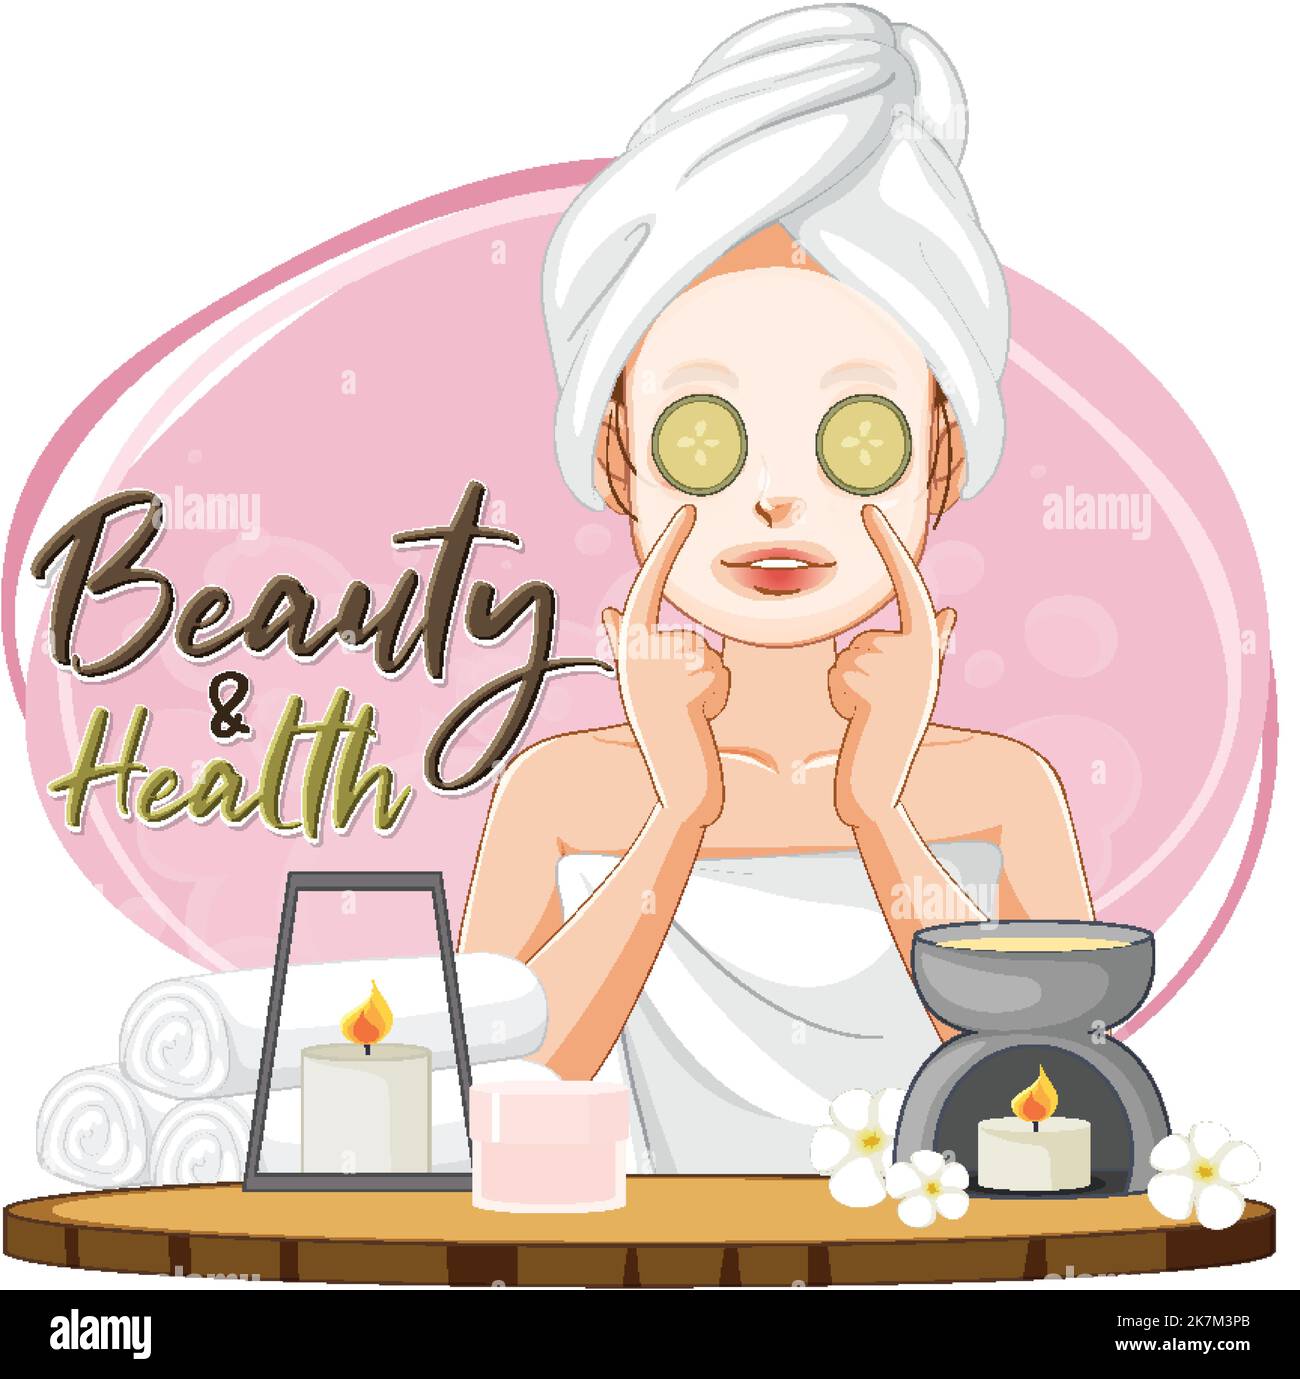 Woman with facial mask illustration Stock Vector